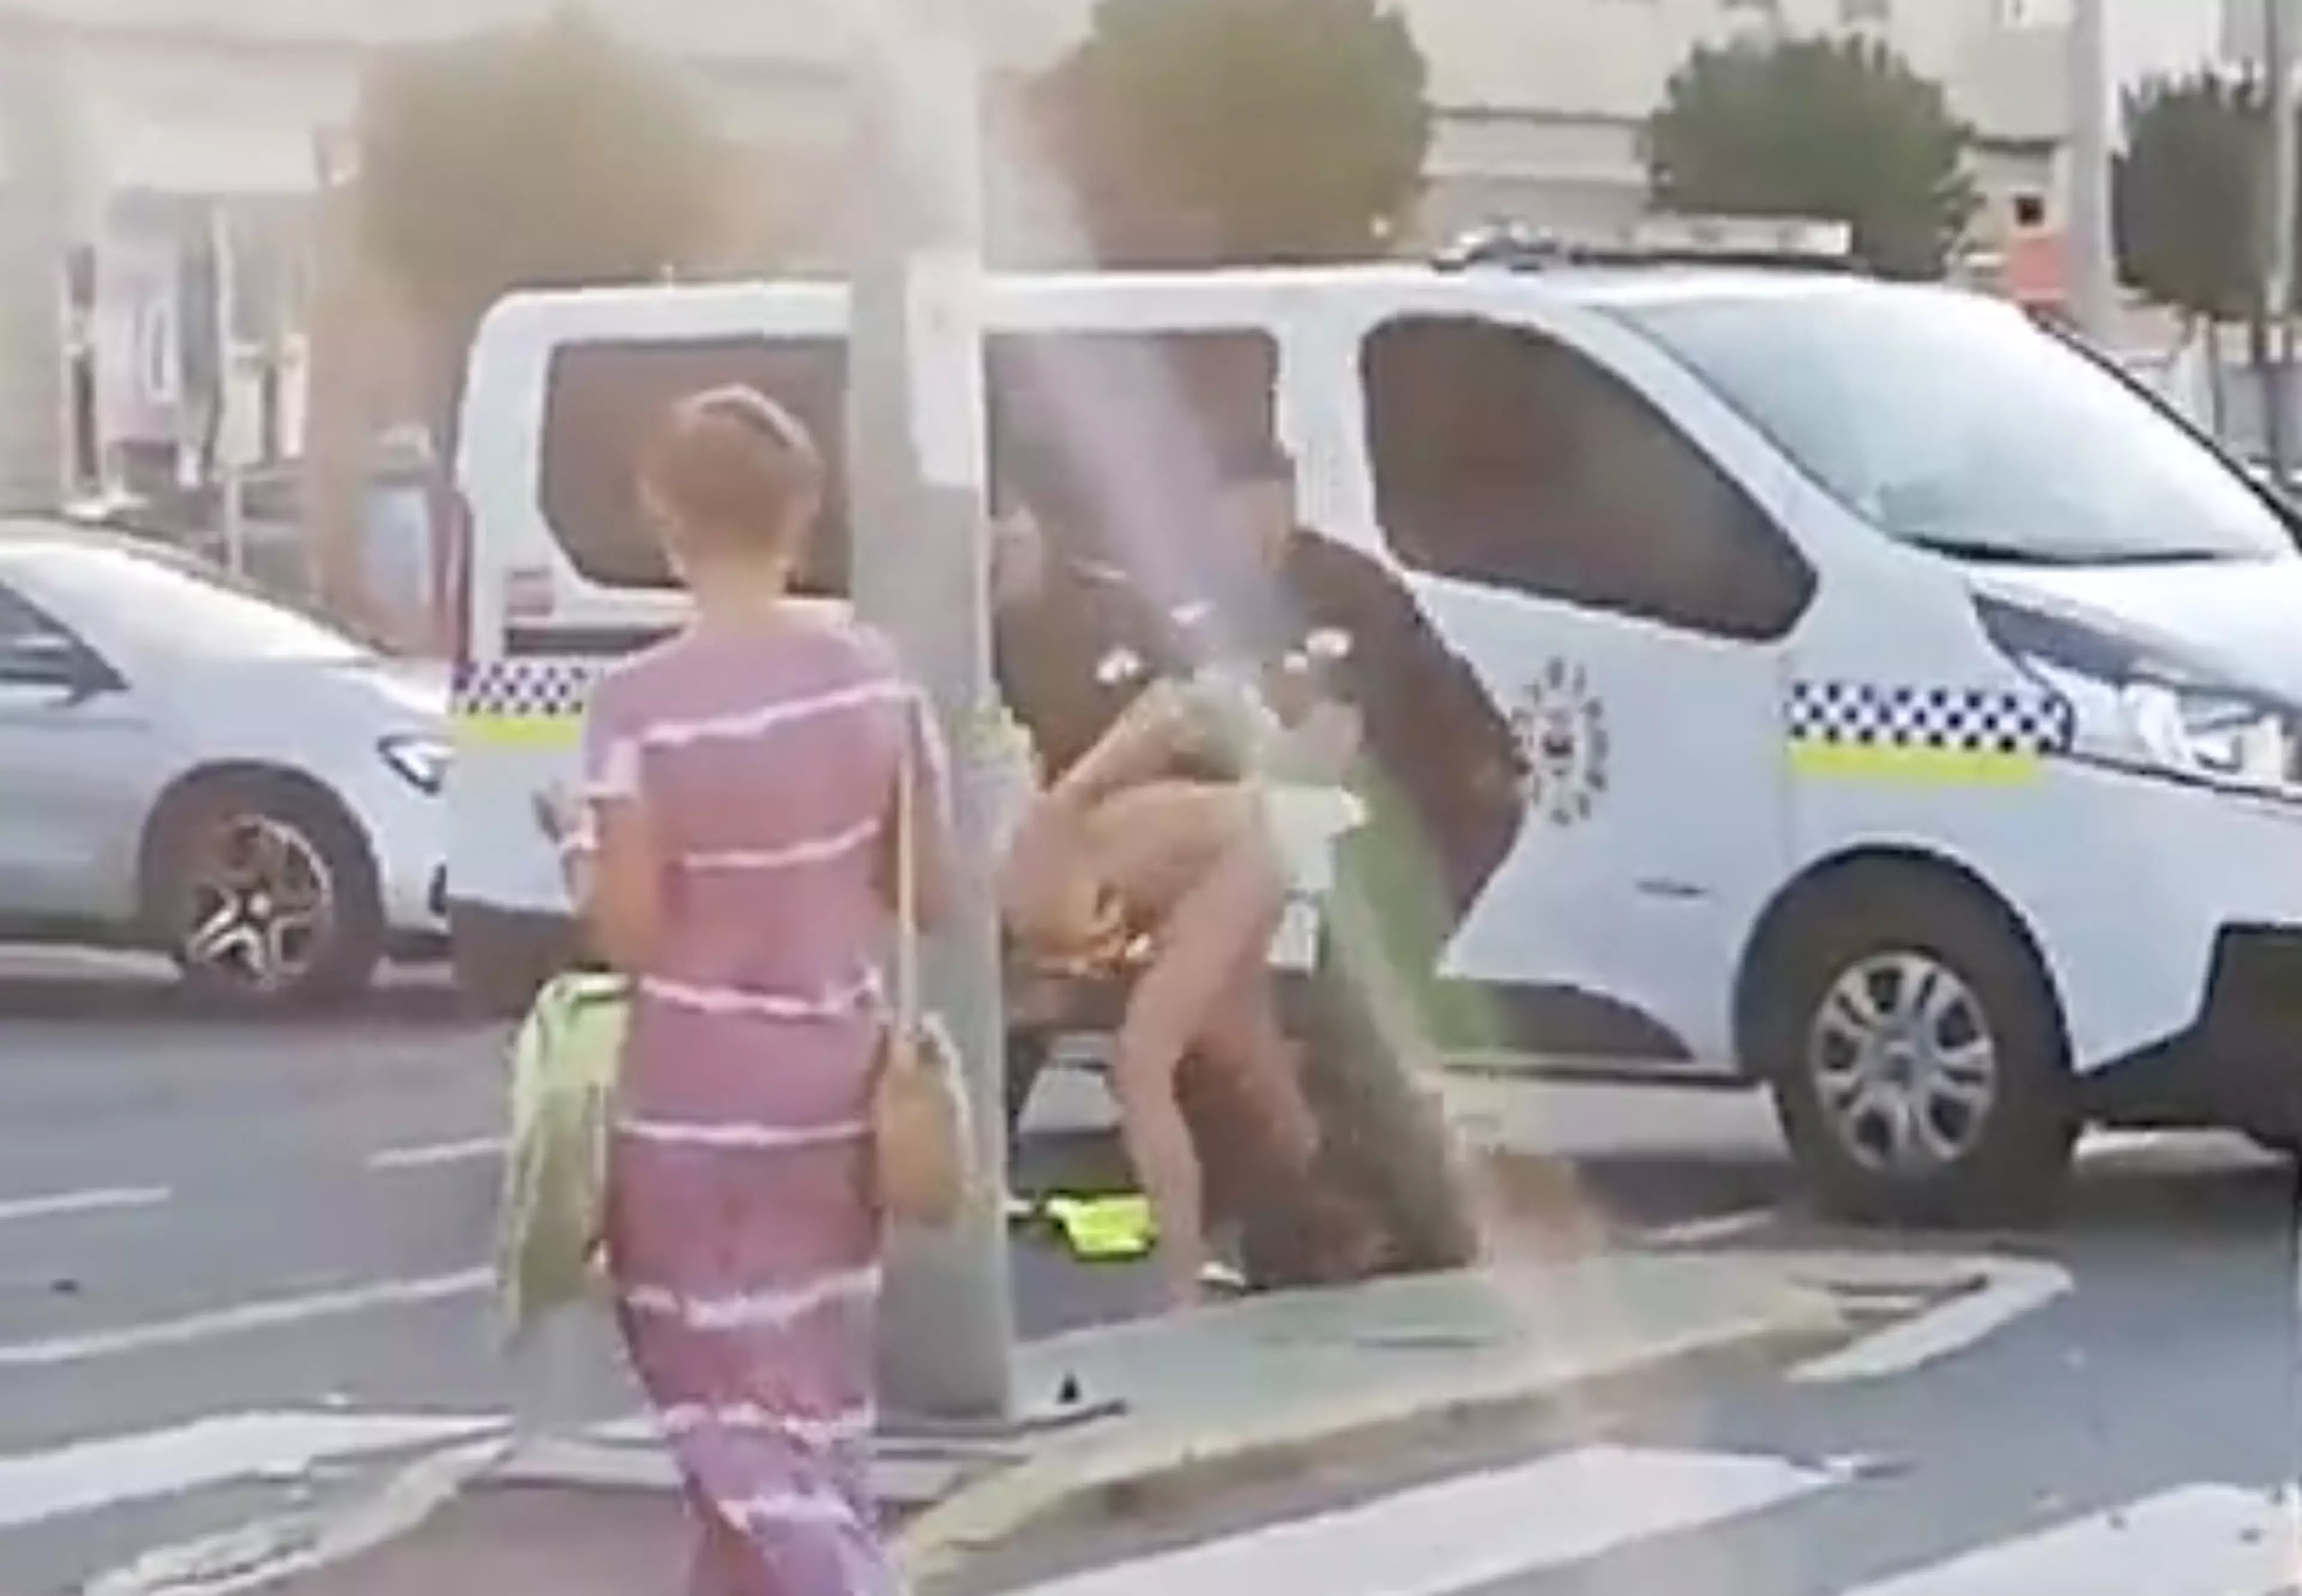 The woman can be seen to resist arrest in the footage.